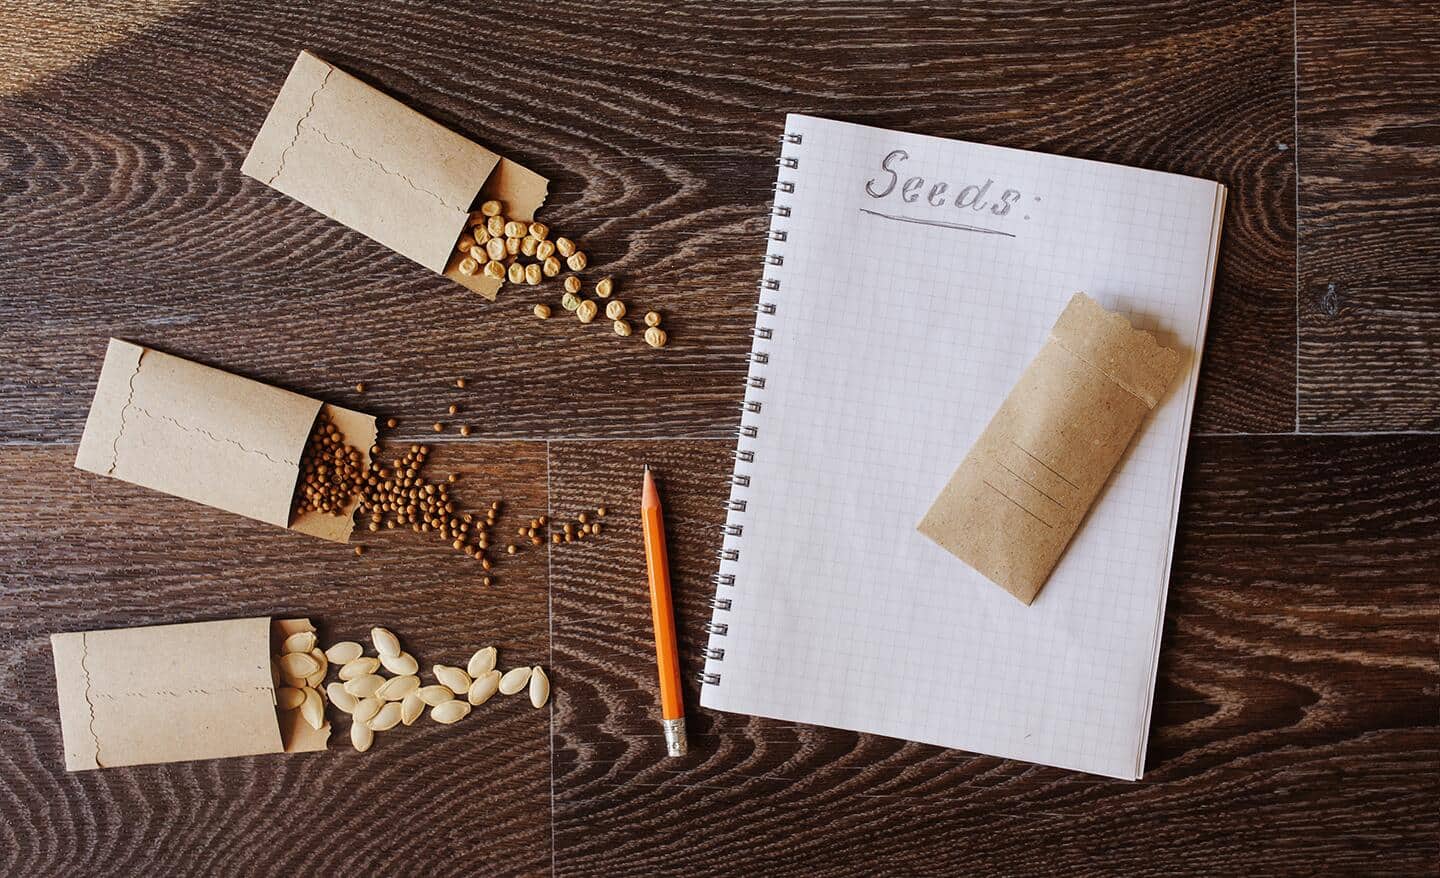 Packets of seeds on a table with an open notebook and pencil